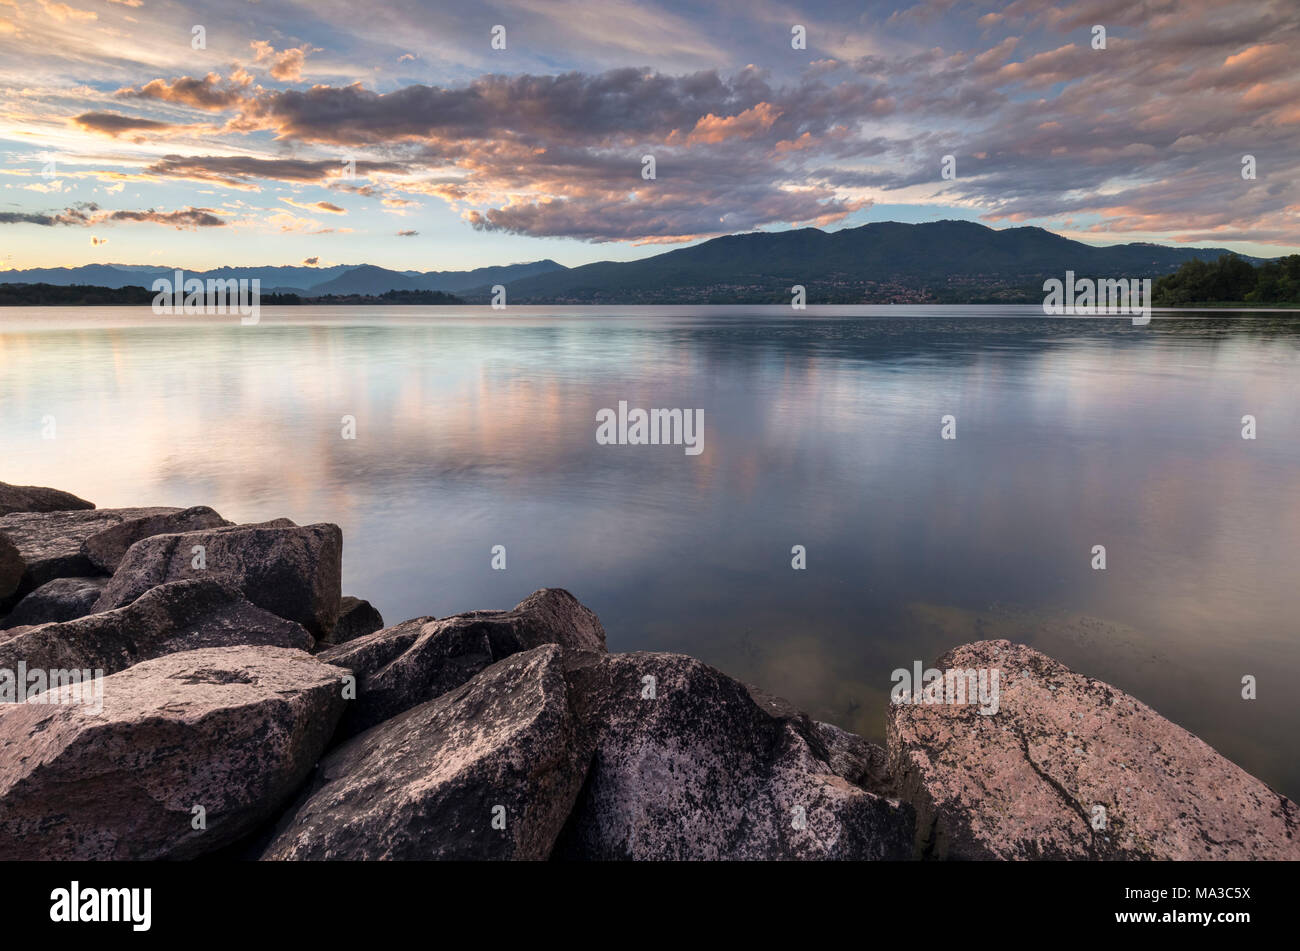 A summer sunset reflecting on Lake Varese at Cazzago Brabbia harbour, Varese Province, Lombardy, Italy. Stock Photo